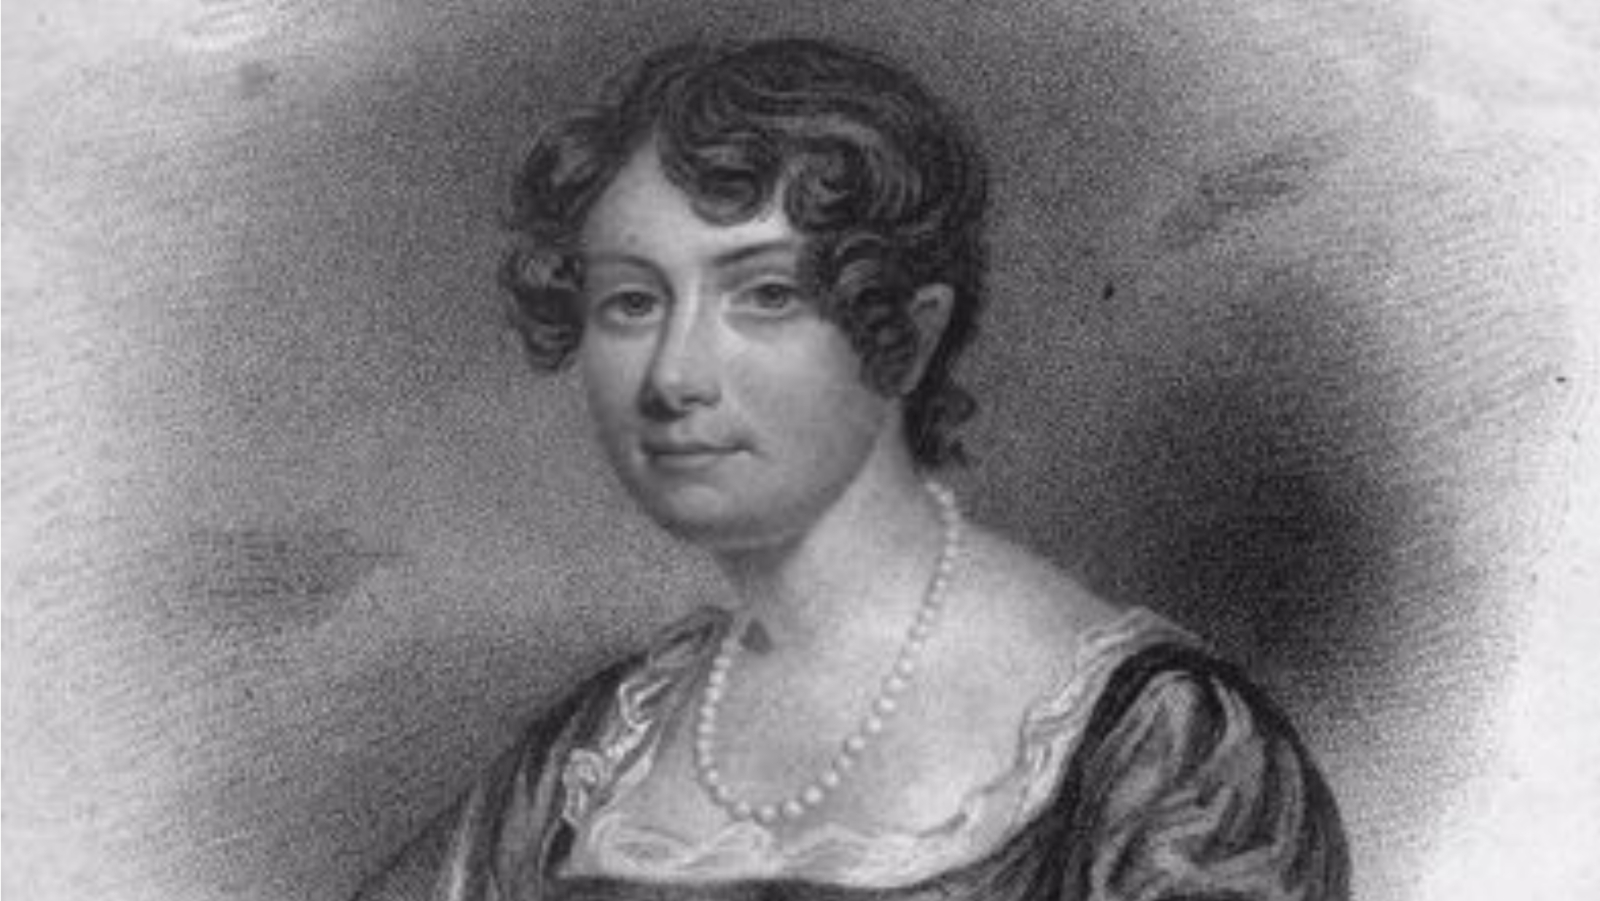 Mary Brunton (1778 - 1818) is among the authors to be celebrated.